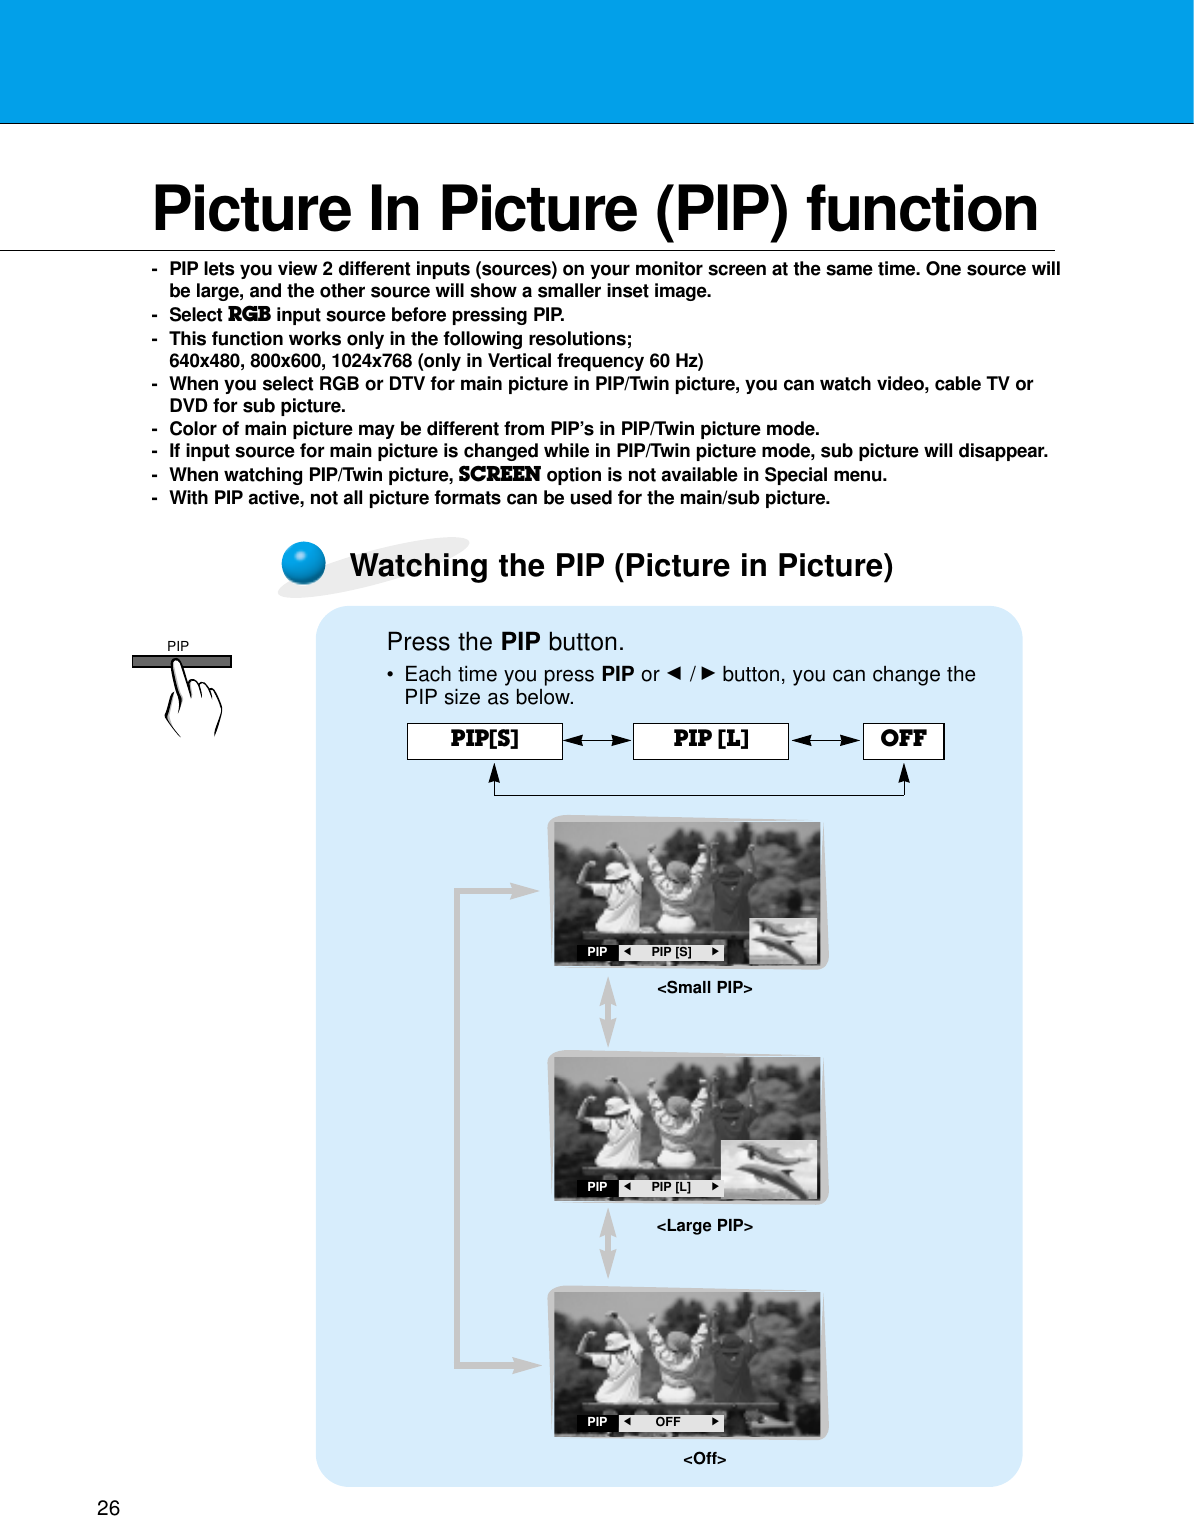 26Picture In Picture (PIP) function- PIP lets you view 2 different inputs (sources) on your monitor screen at the same time. One source willbe large, and the other source will show a smaller inset image.- Select RGB input source before pressing PIP.- This function works only in the following resolutions; 640x480, 800x600, 1024x768 (only in Vertical frequency 60 Hz)- When you select RGB or DTV for main picture in PIP/Twin picture, you can watch video, cable TV orDVD for sub picture.- Color of main picture may be different from PIP’s in PIP/Twin picture mode.- If input source for main picture is changed while in PIP/Twin picture mode, sub picture will disappear.- When watching PIP/Twin picture, SCREEN option is not available in Special menu.- With PIP active, not all picture formats can be used for the main/sub picture.Watching the PIP (Picture in Picture)Press the PIP button.•Each time you press PIP or F /Gbutton, you can change thePIP size as below.PIP[S] PIP [L] OFFPIPF     PIP [S] GPIPF     PIP [L] GPIPF      OFFG&lt;Small PIP&gt;&lt;Large PIP&gt;&lt;Off&gt;PIP